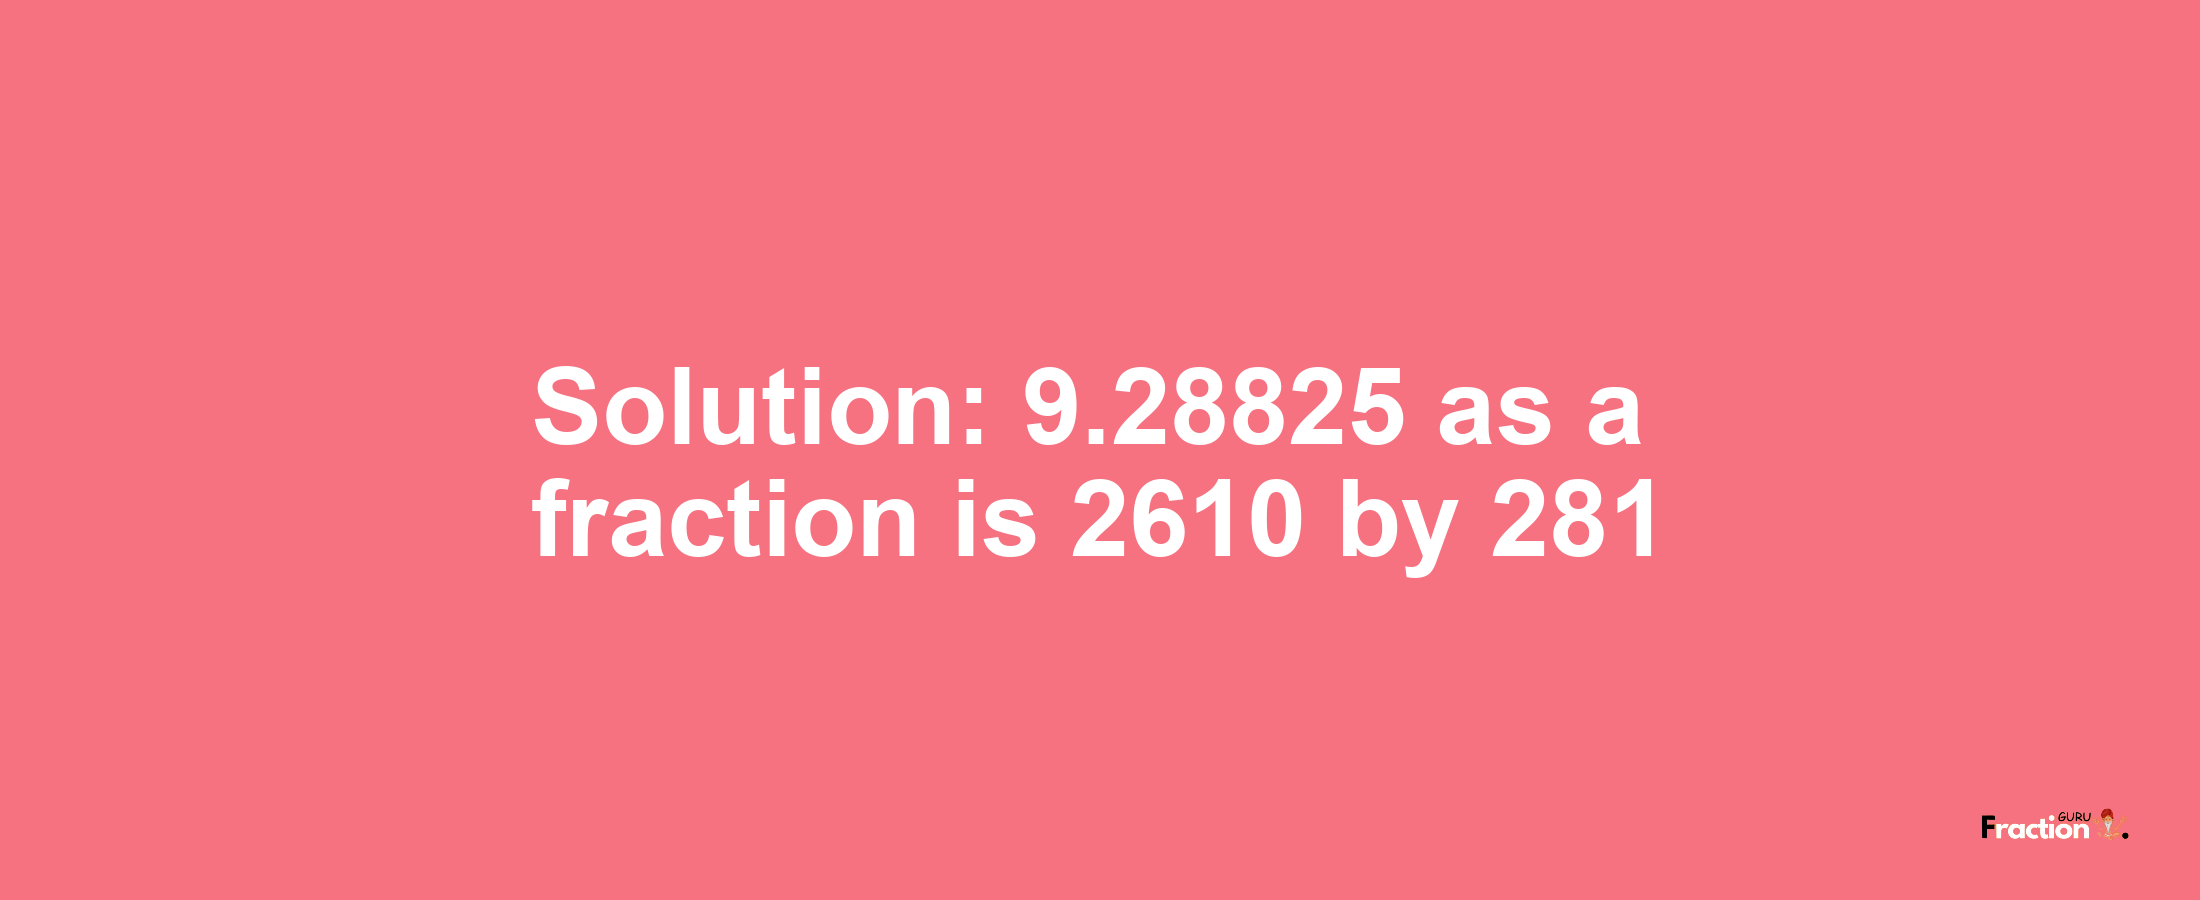 Solution:9.28825 as a fraction is 2610/281